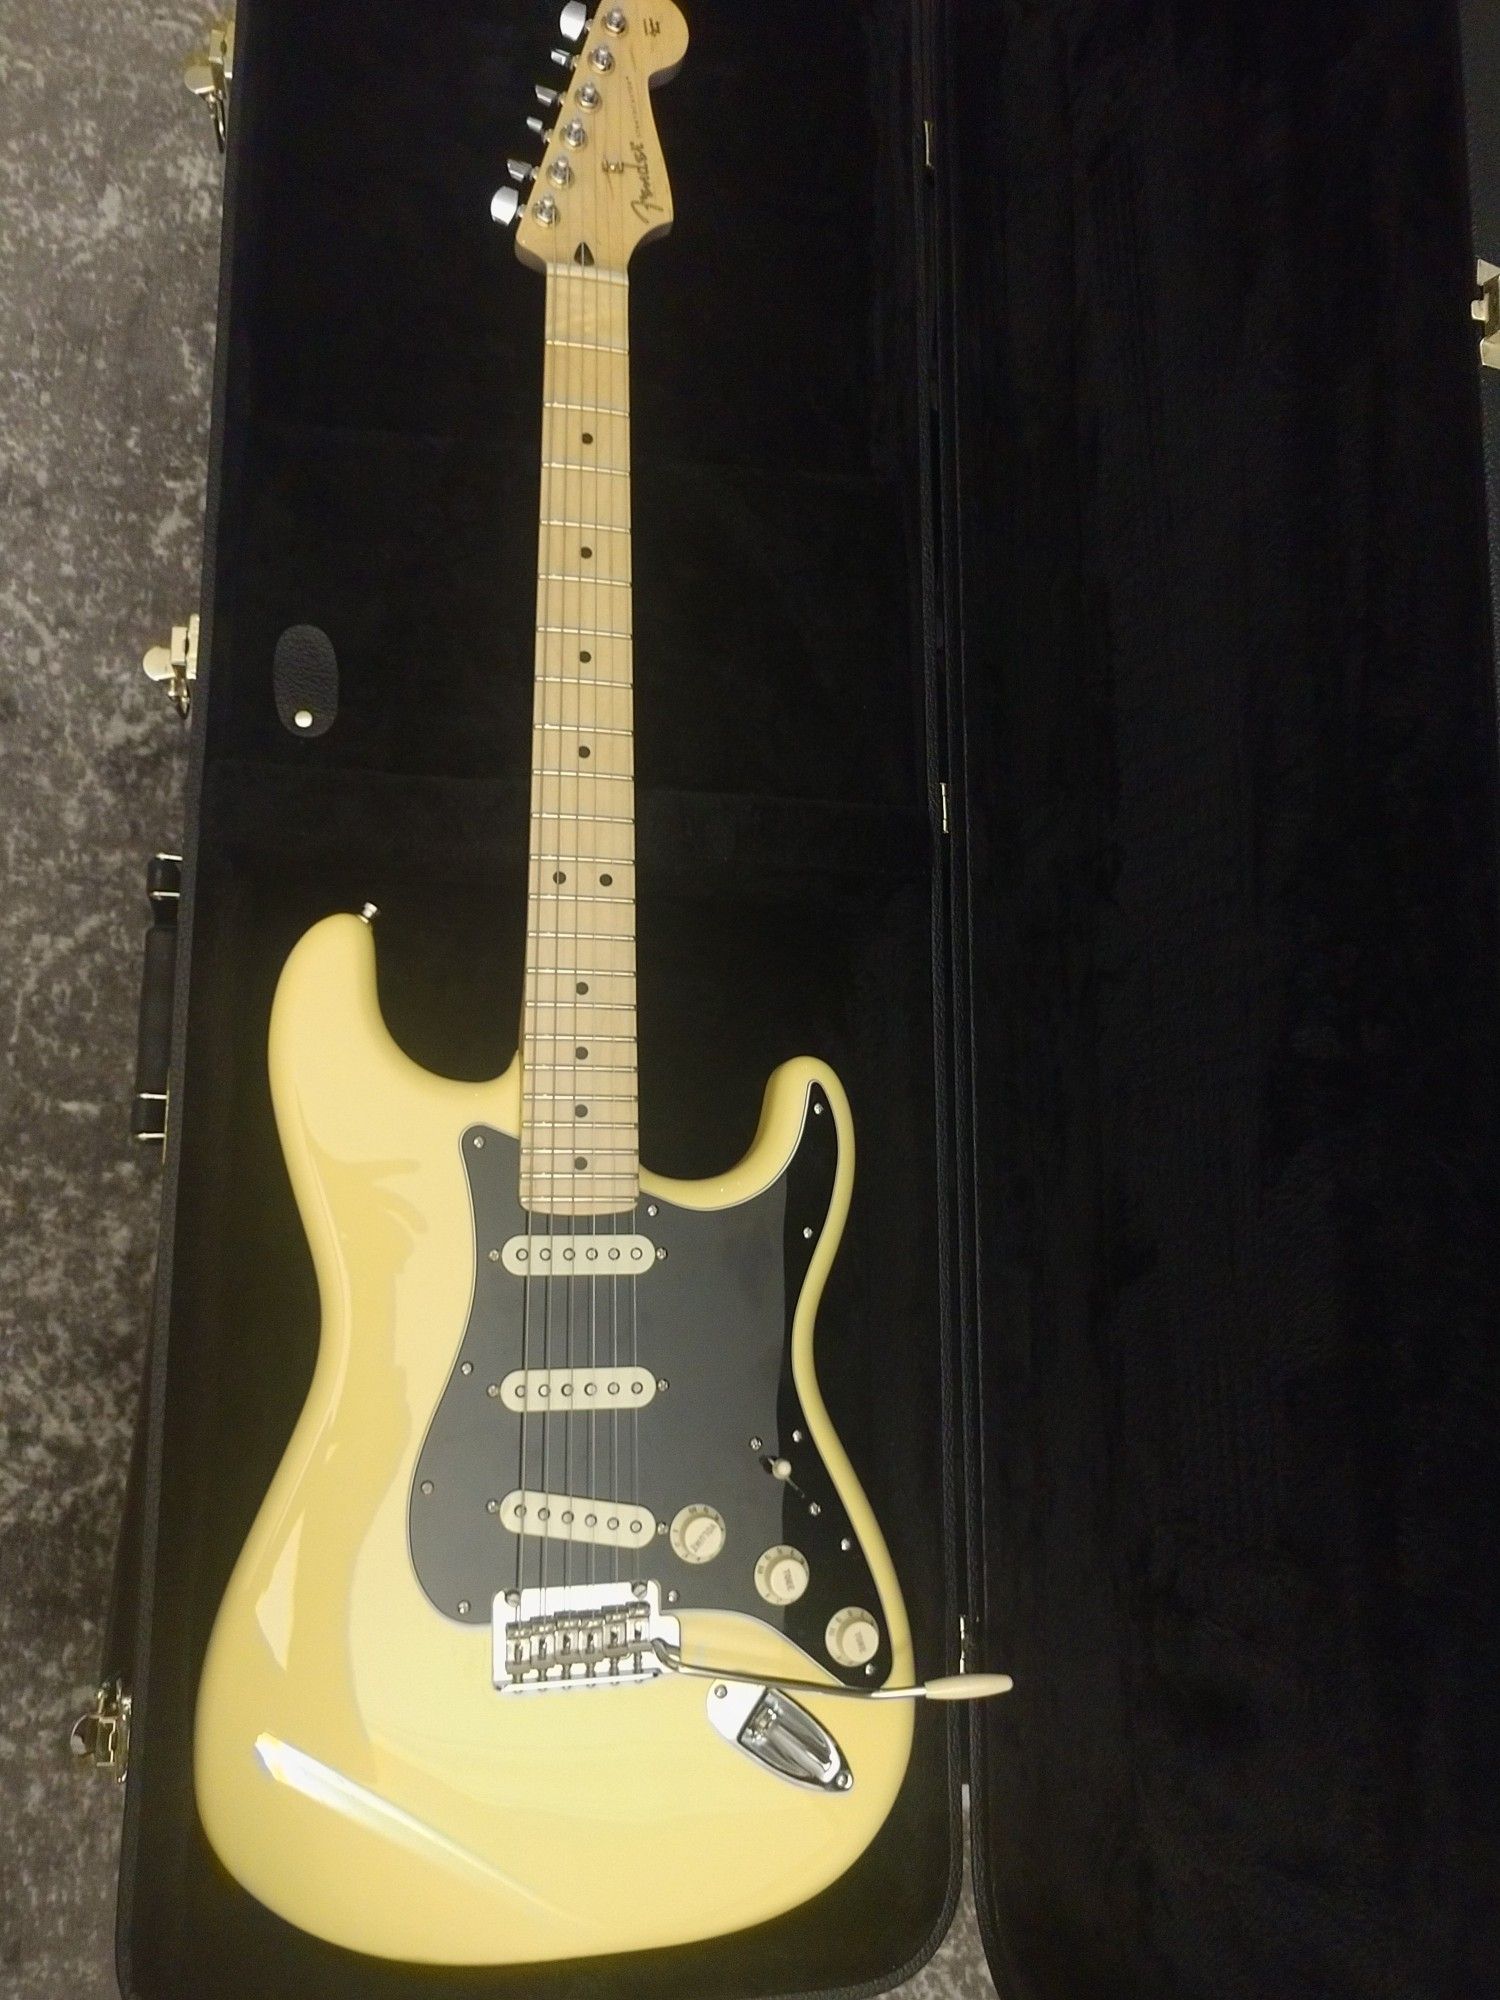 Trade my 2020 Fender Player Stratocaster guitar for your tube amp